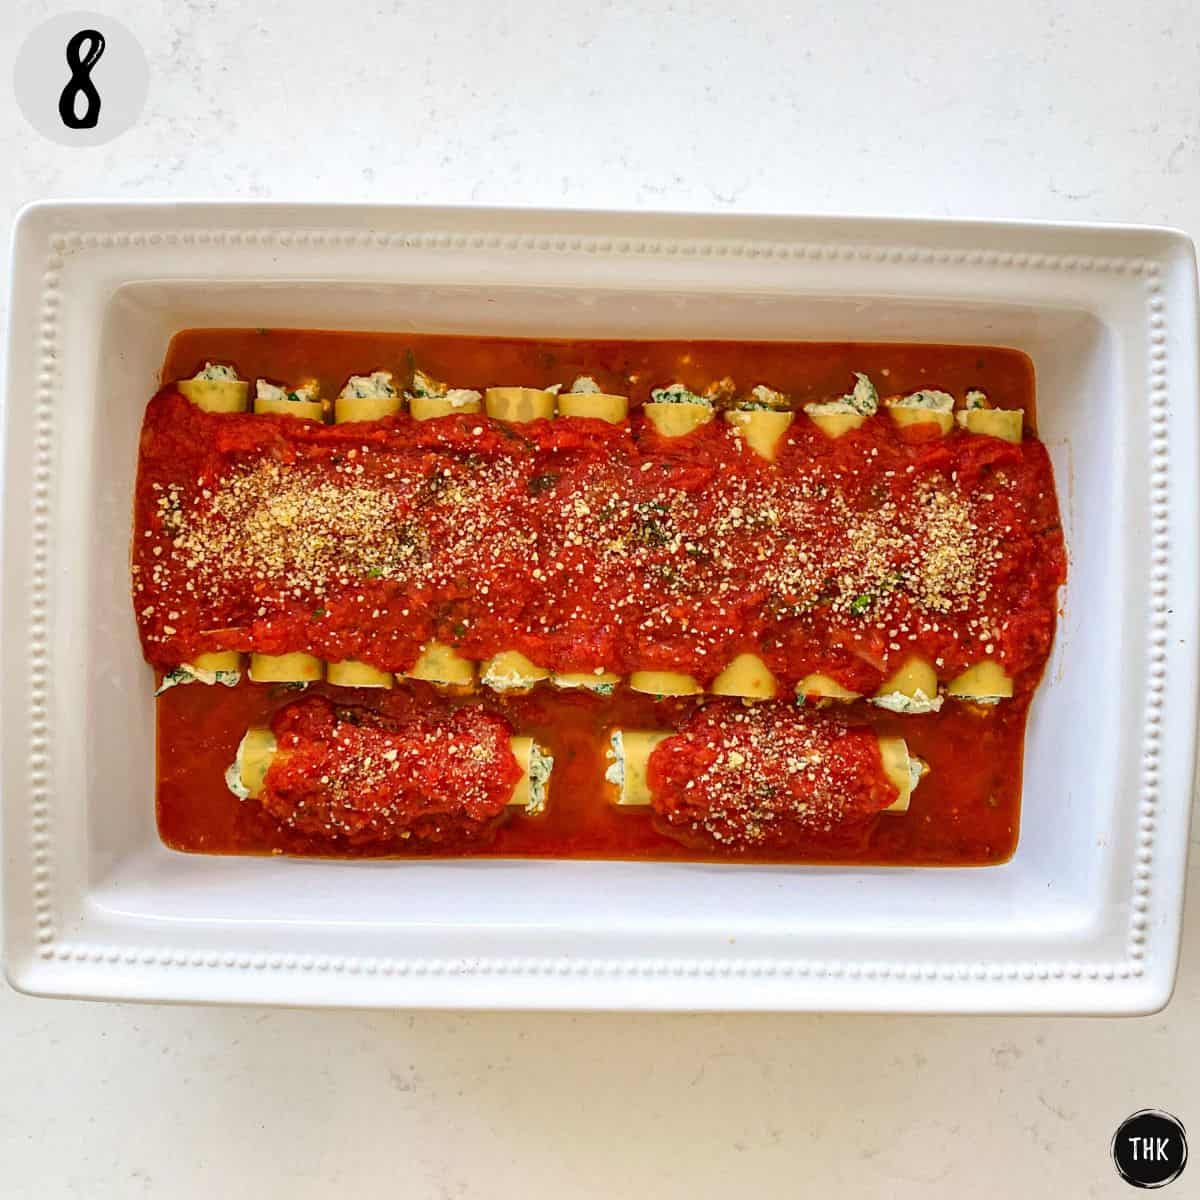 Cannelloni stuffed with cheese and spinach in baking dish.